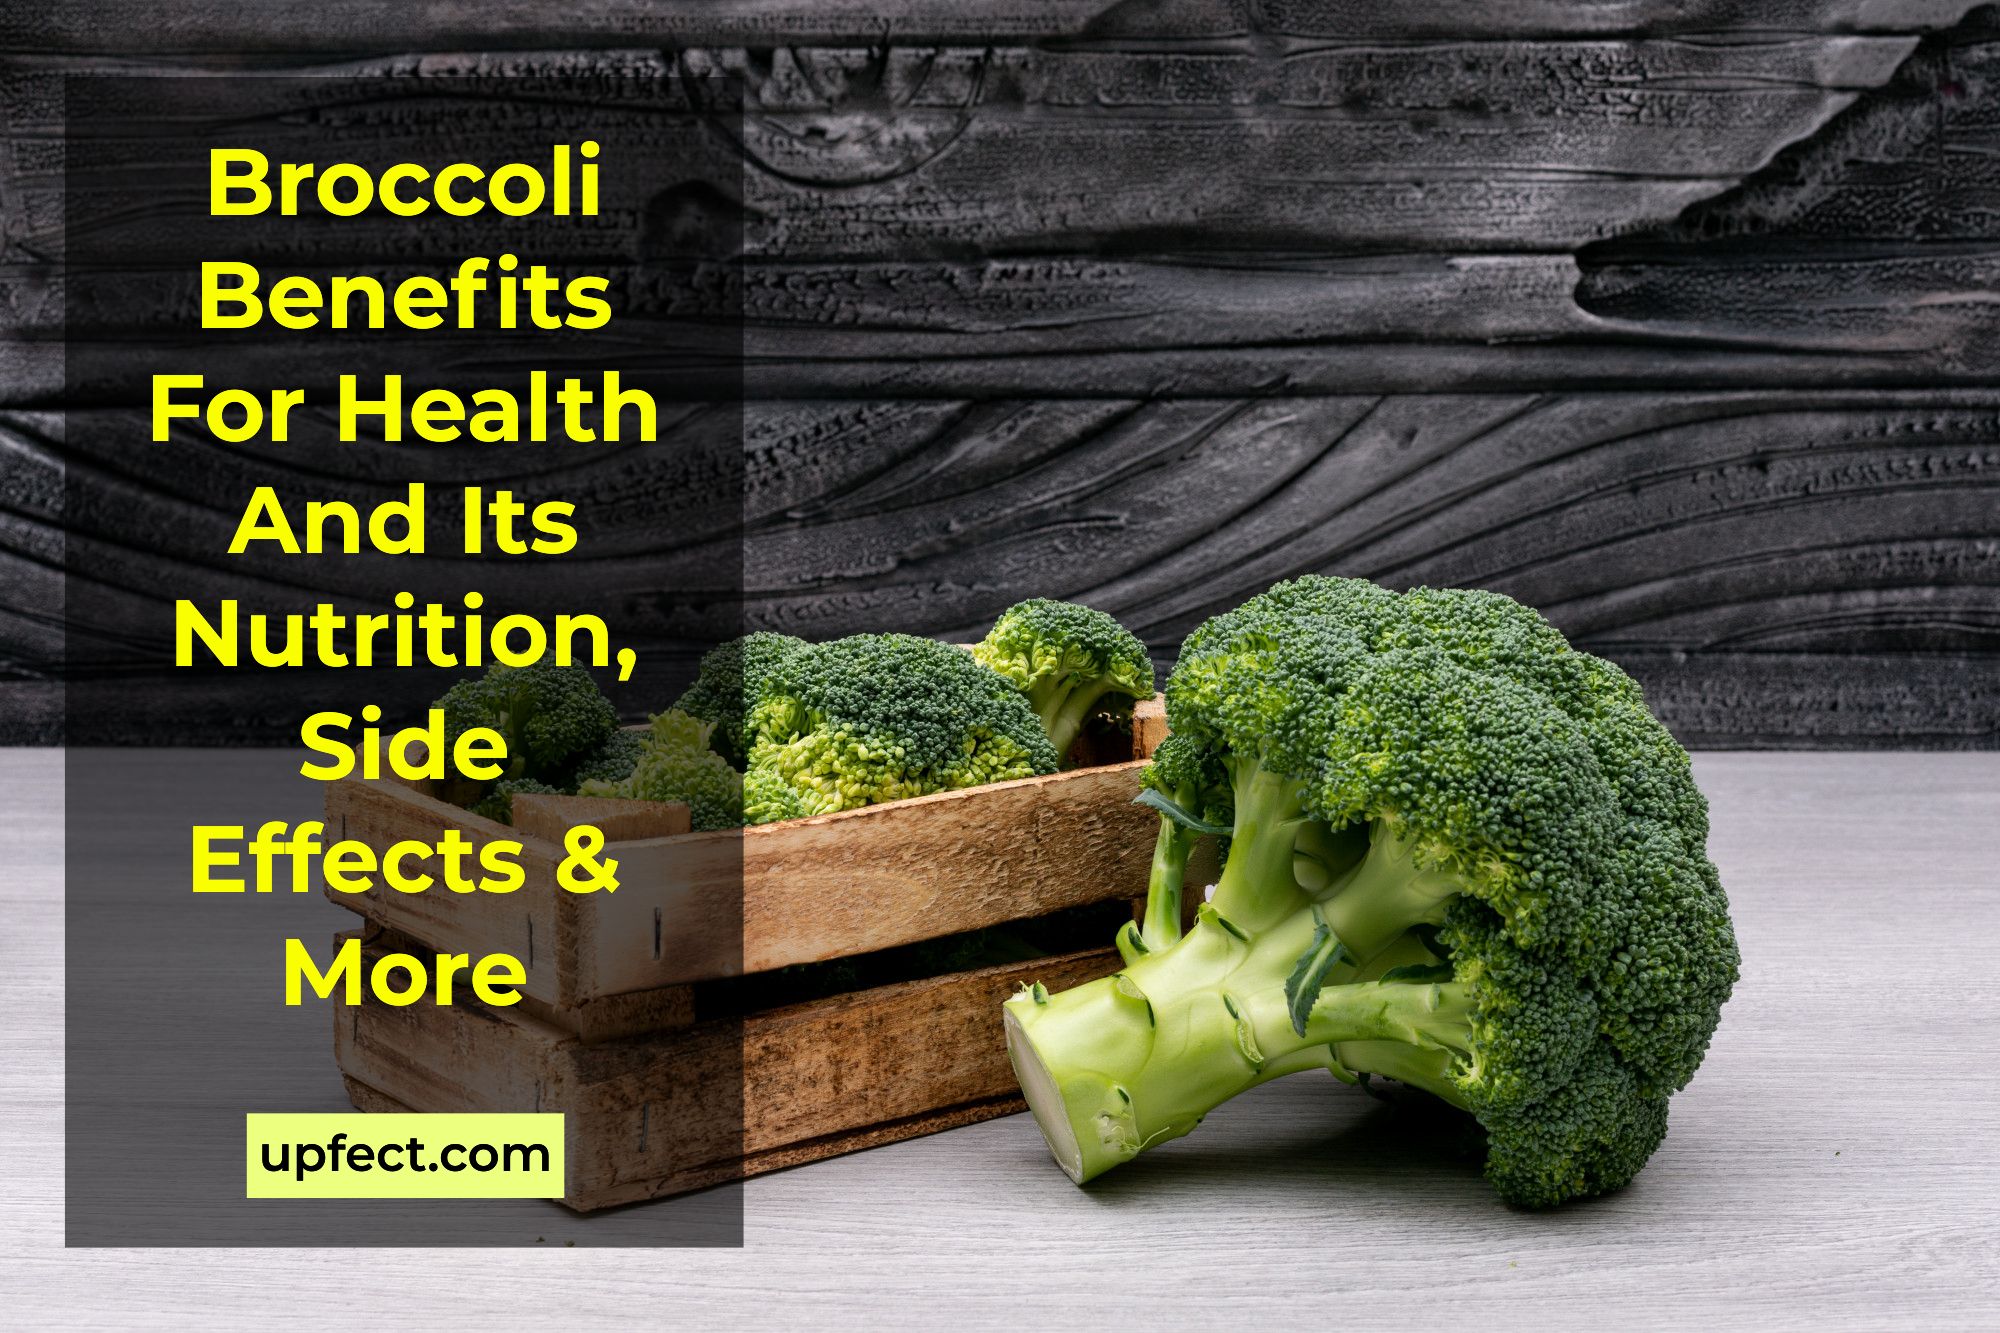 Broccoli Benefits For Health And Its Nutrition, Side Effects & More